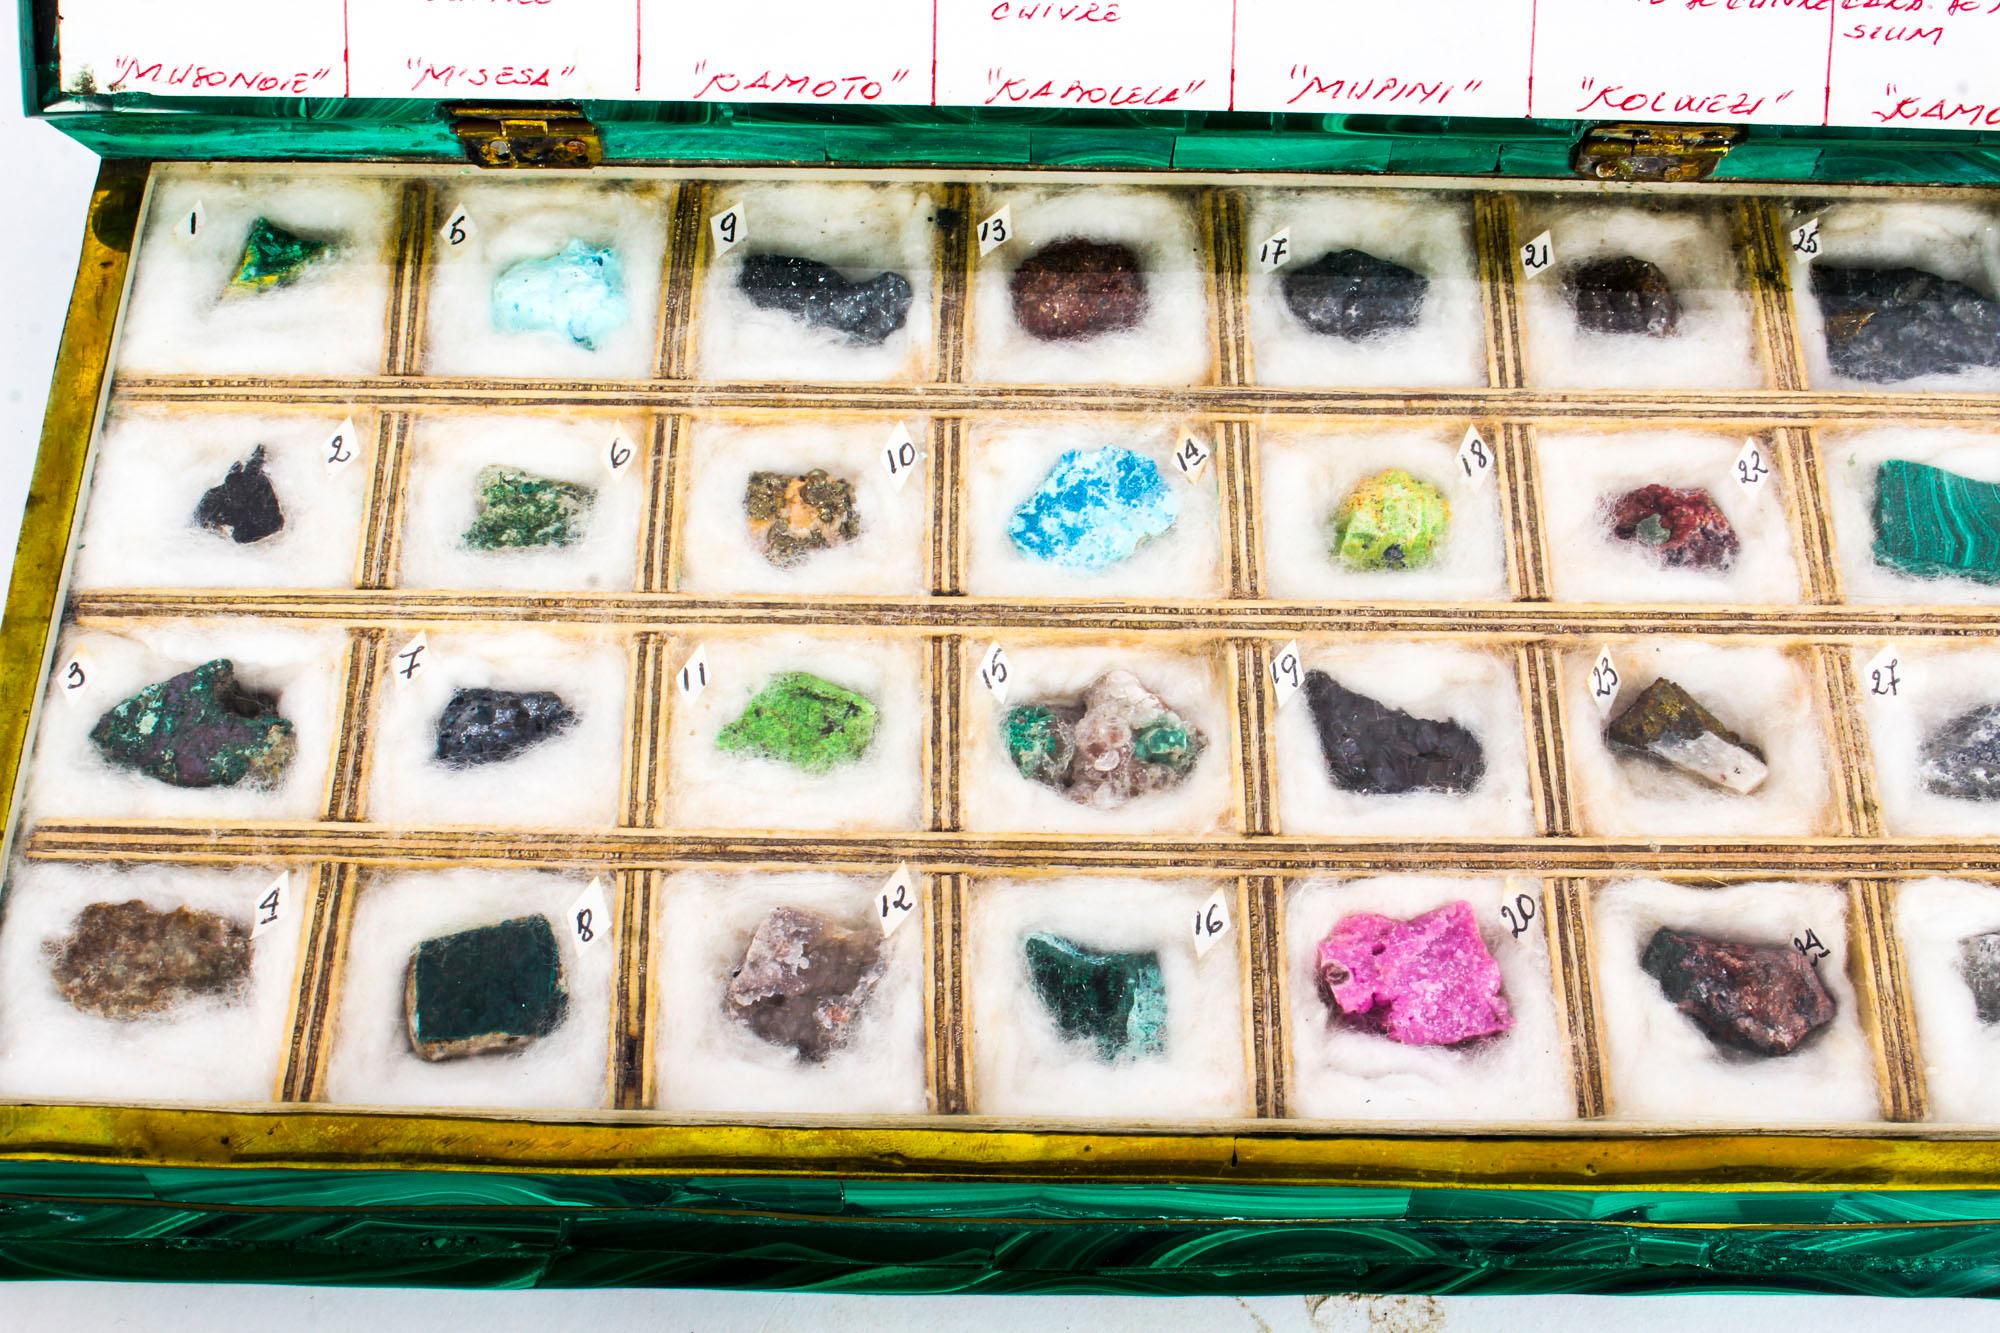 Early 20th Century Russian Malachite Book Form Box with Mineral Specimens 2